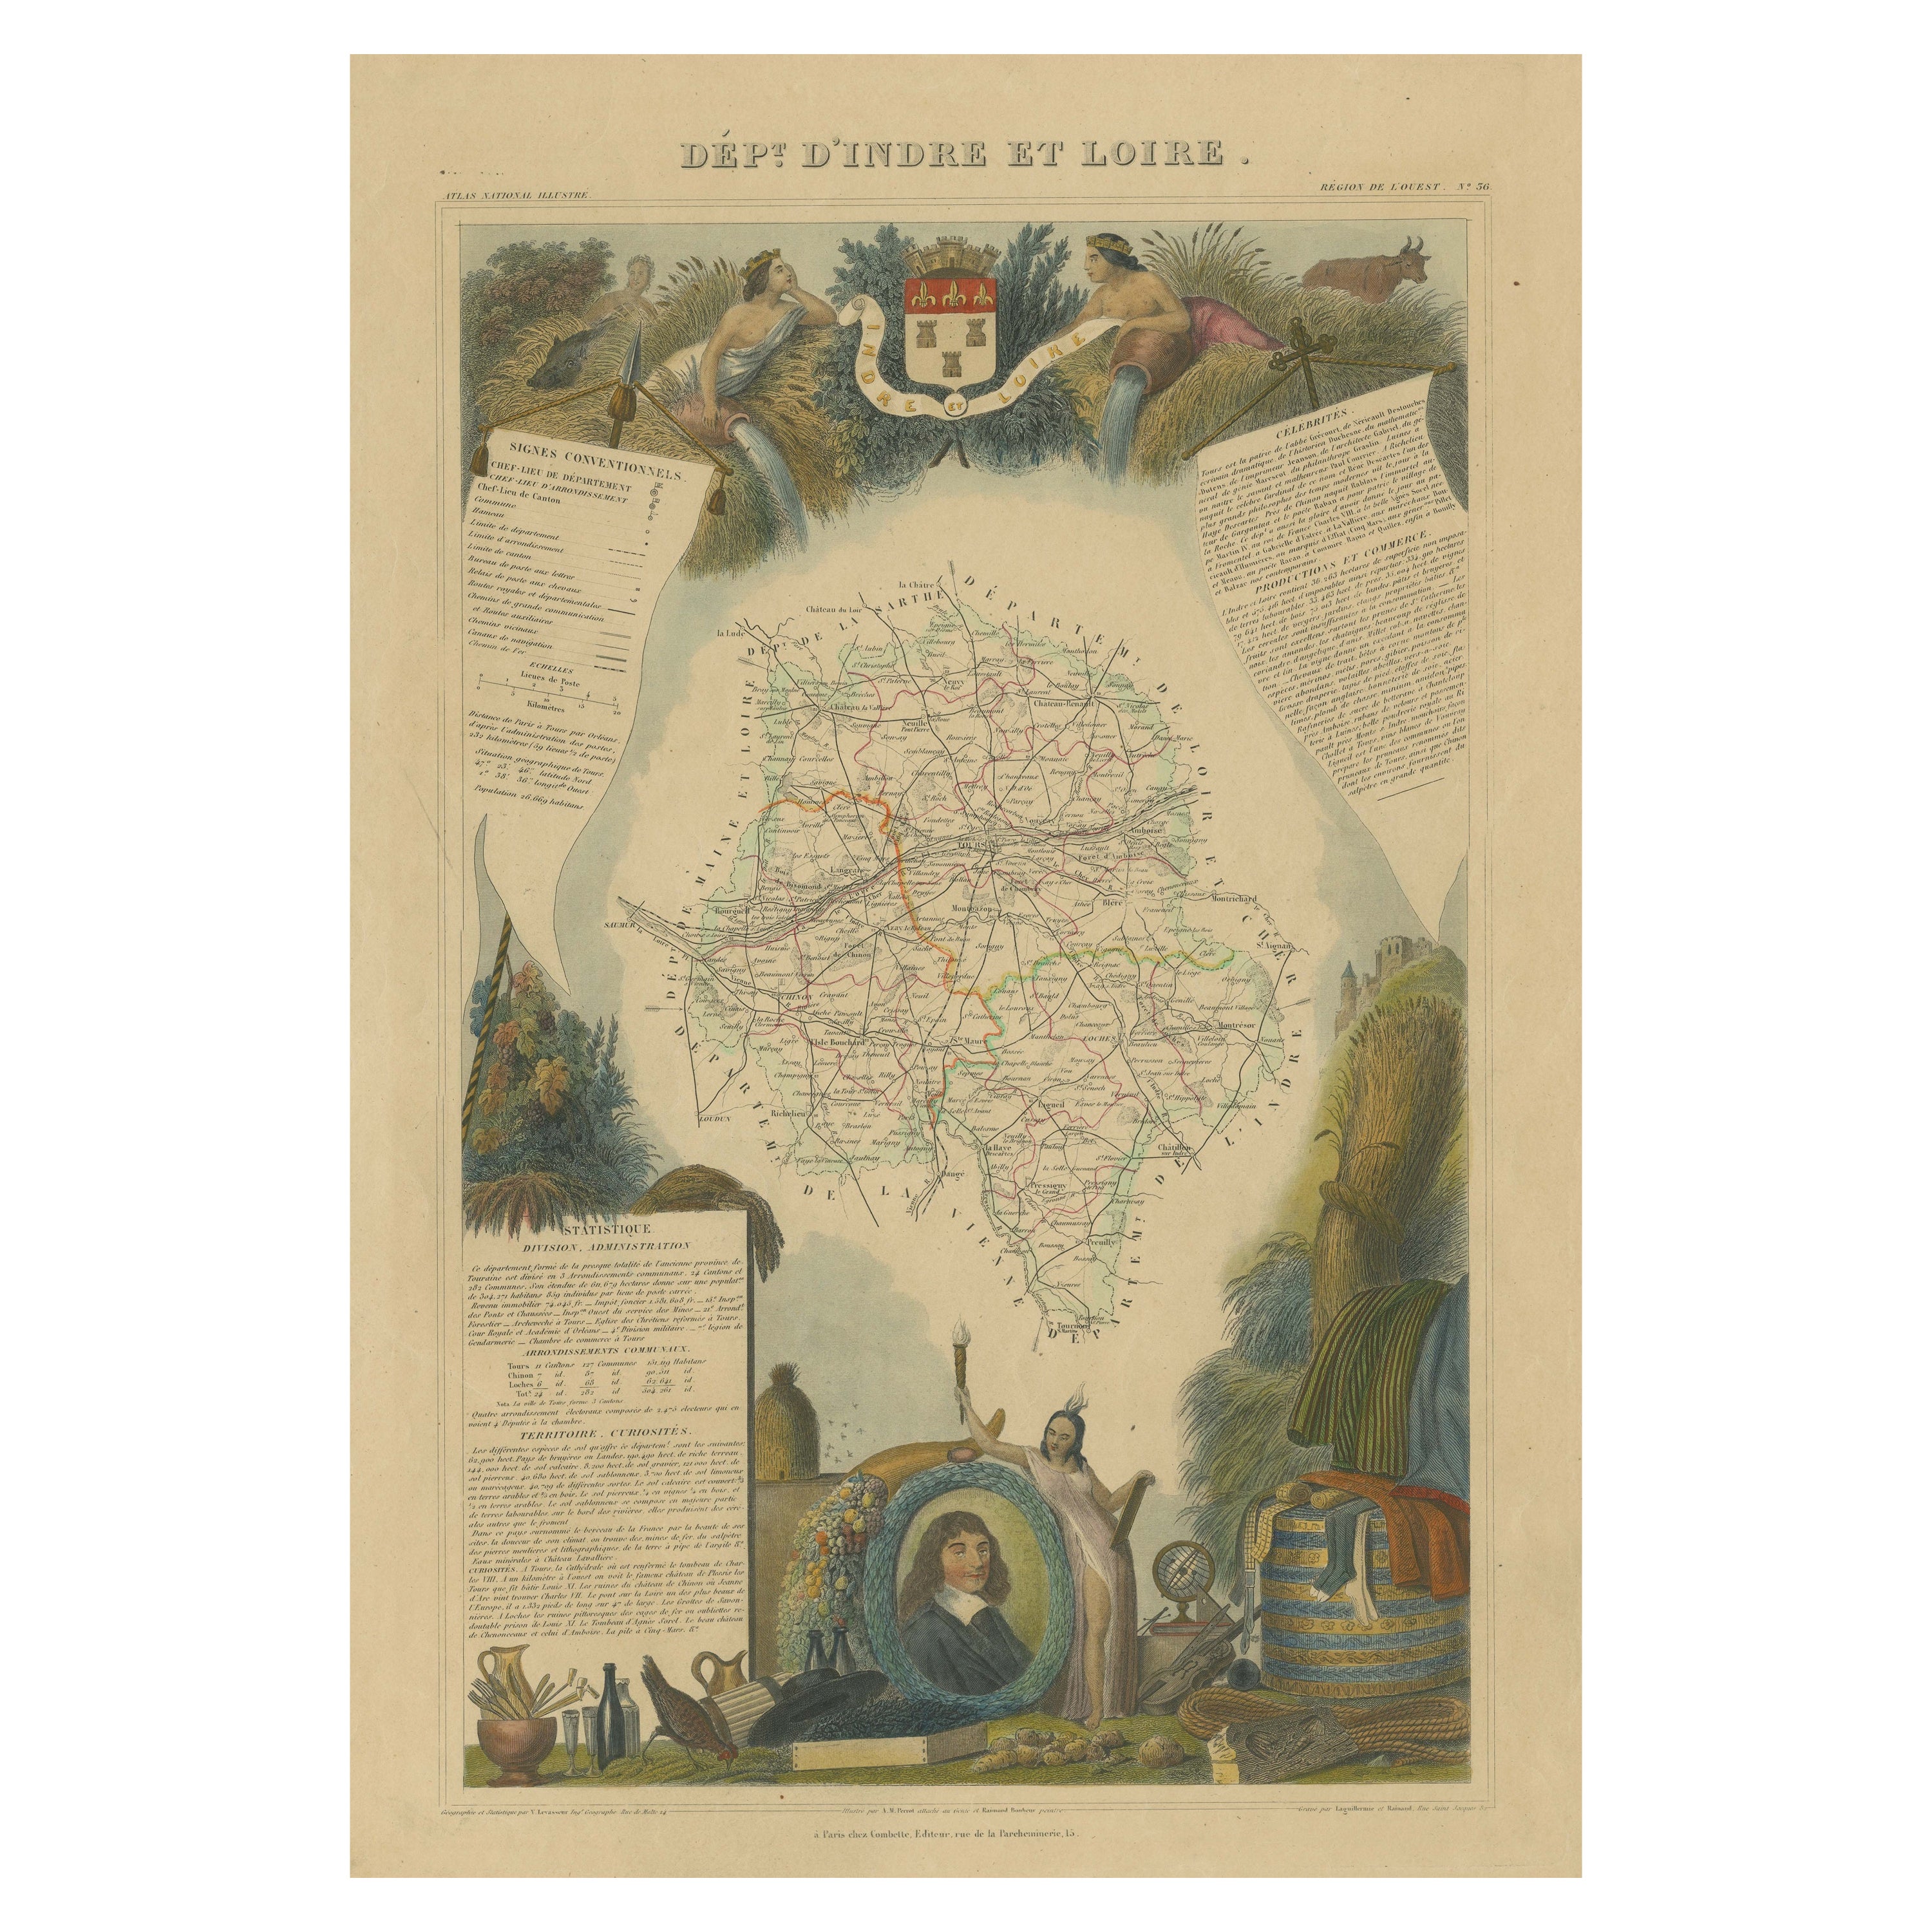 Hand Colored Antique Map of the department of Indre and Loire, France